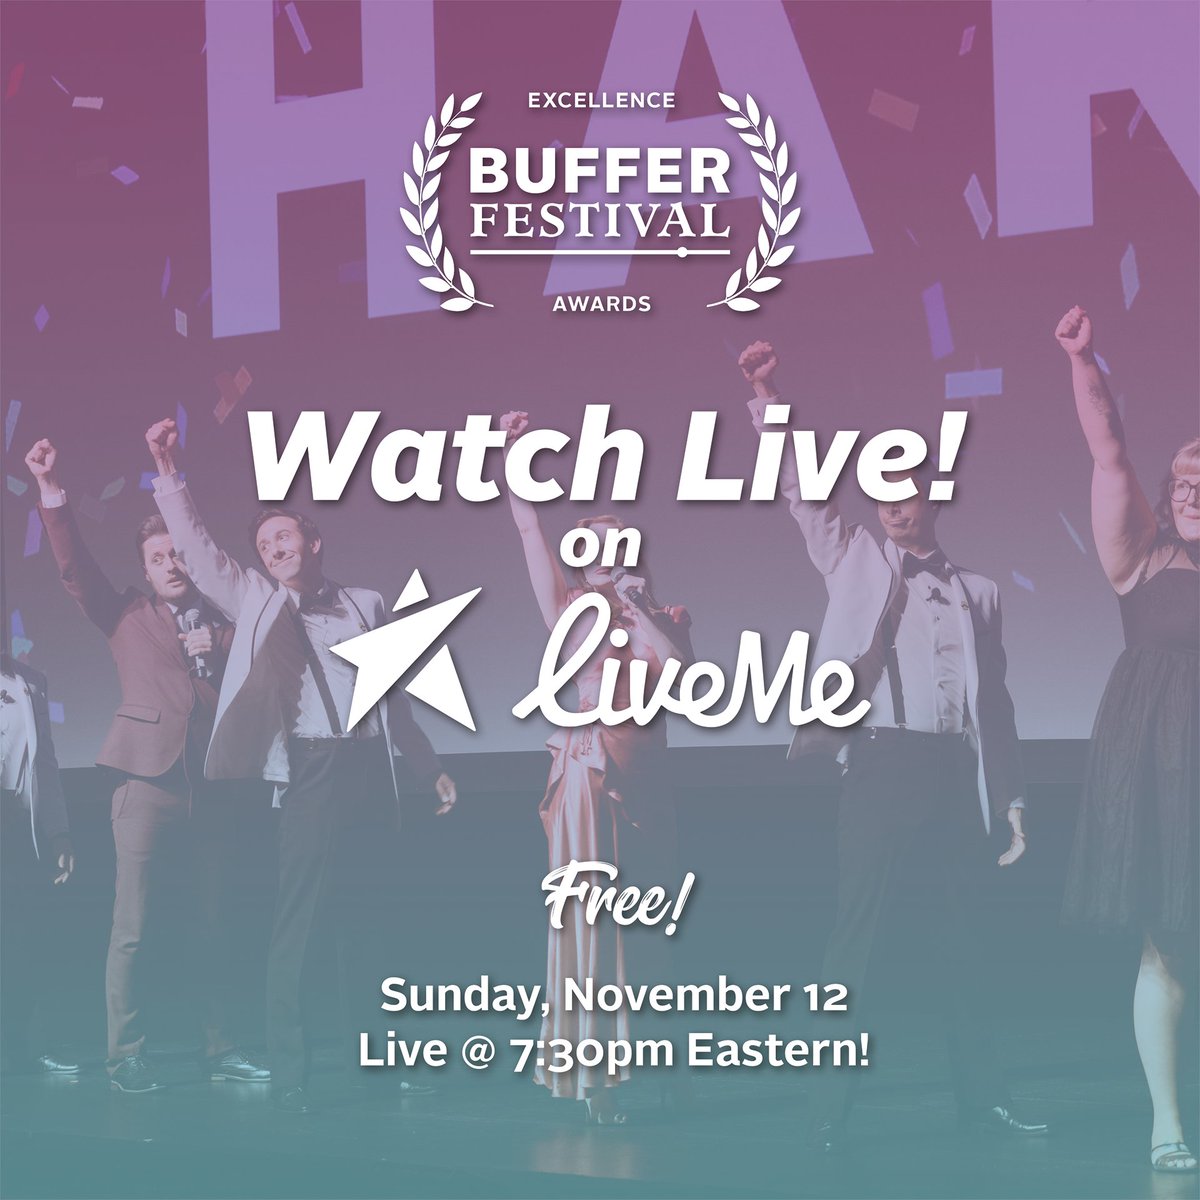 Set your watch! the Buffer Festival Excellence Awards 🎬 Live stream is Happening TODAY at 7:30pm EST thanks to @streamLiveme! Click on the link to watch: liveme.com/?qc=2